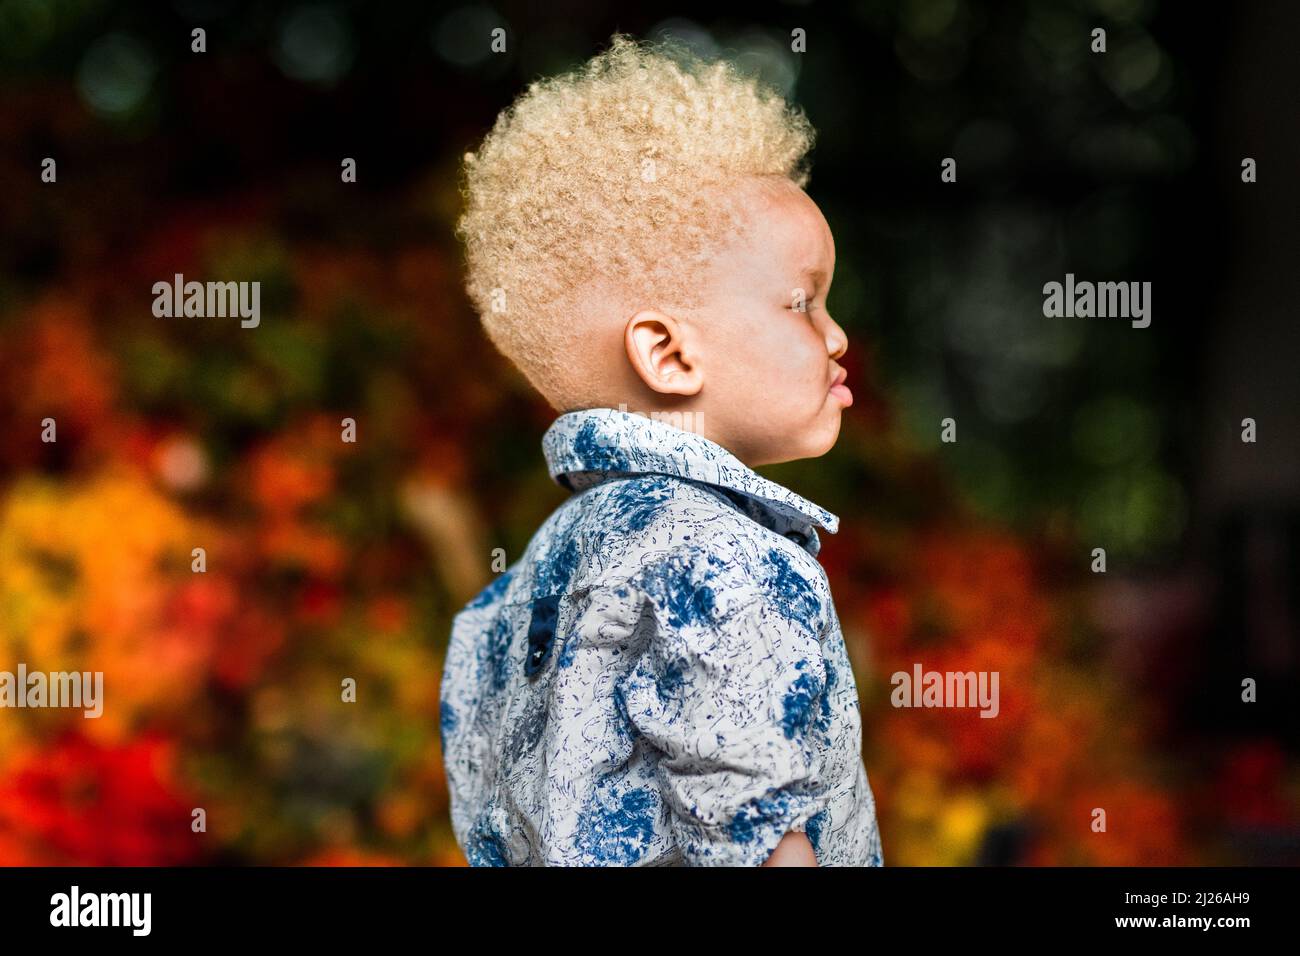 An Afro-Colombian albino boy hangs out during the chontaduro (peach palm) fruit processing in a facility in Cali, Valle del Cauca, Colombia. Stock Photo